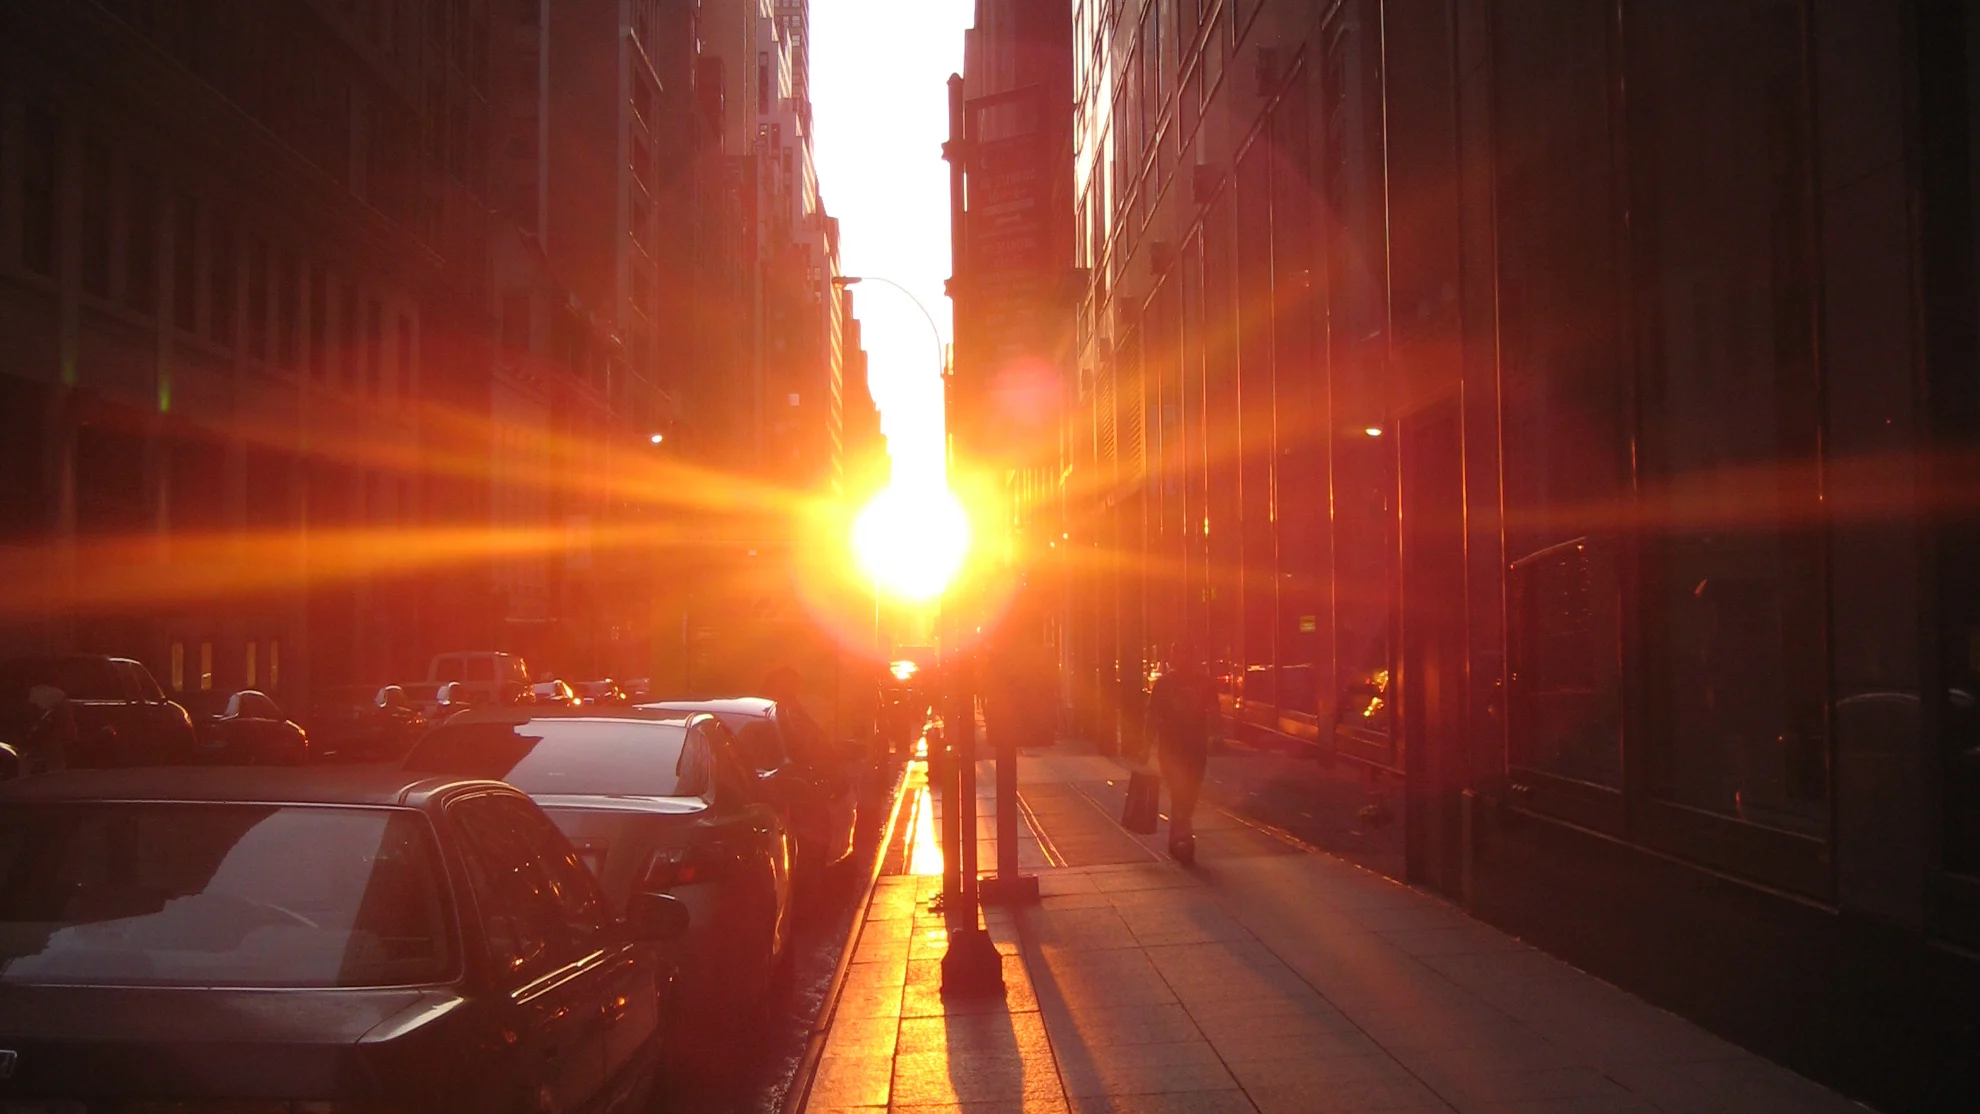 Torontohenge set to deliver downtown Toronto's best sunsets this weekend